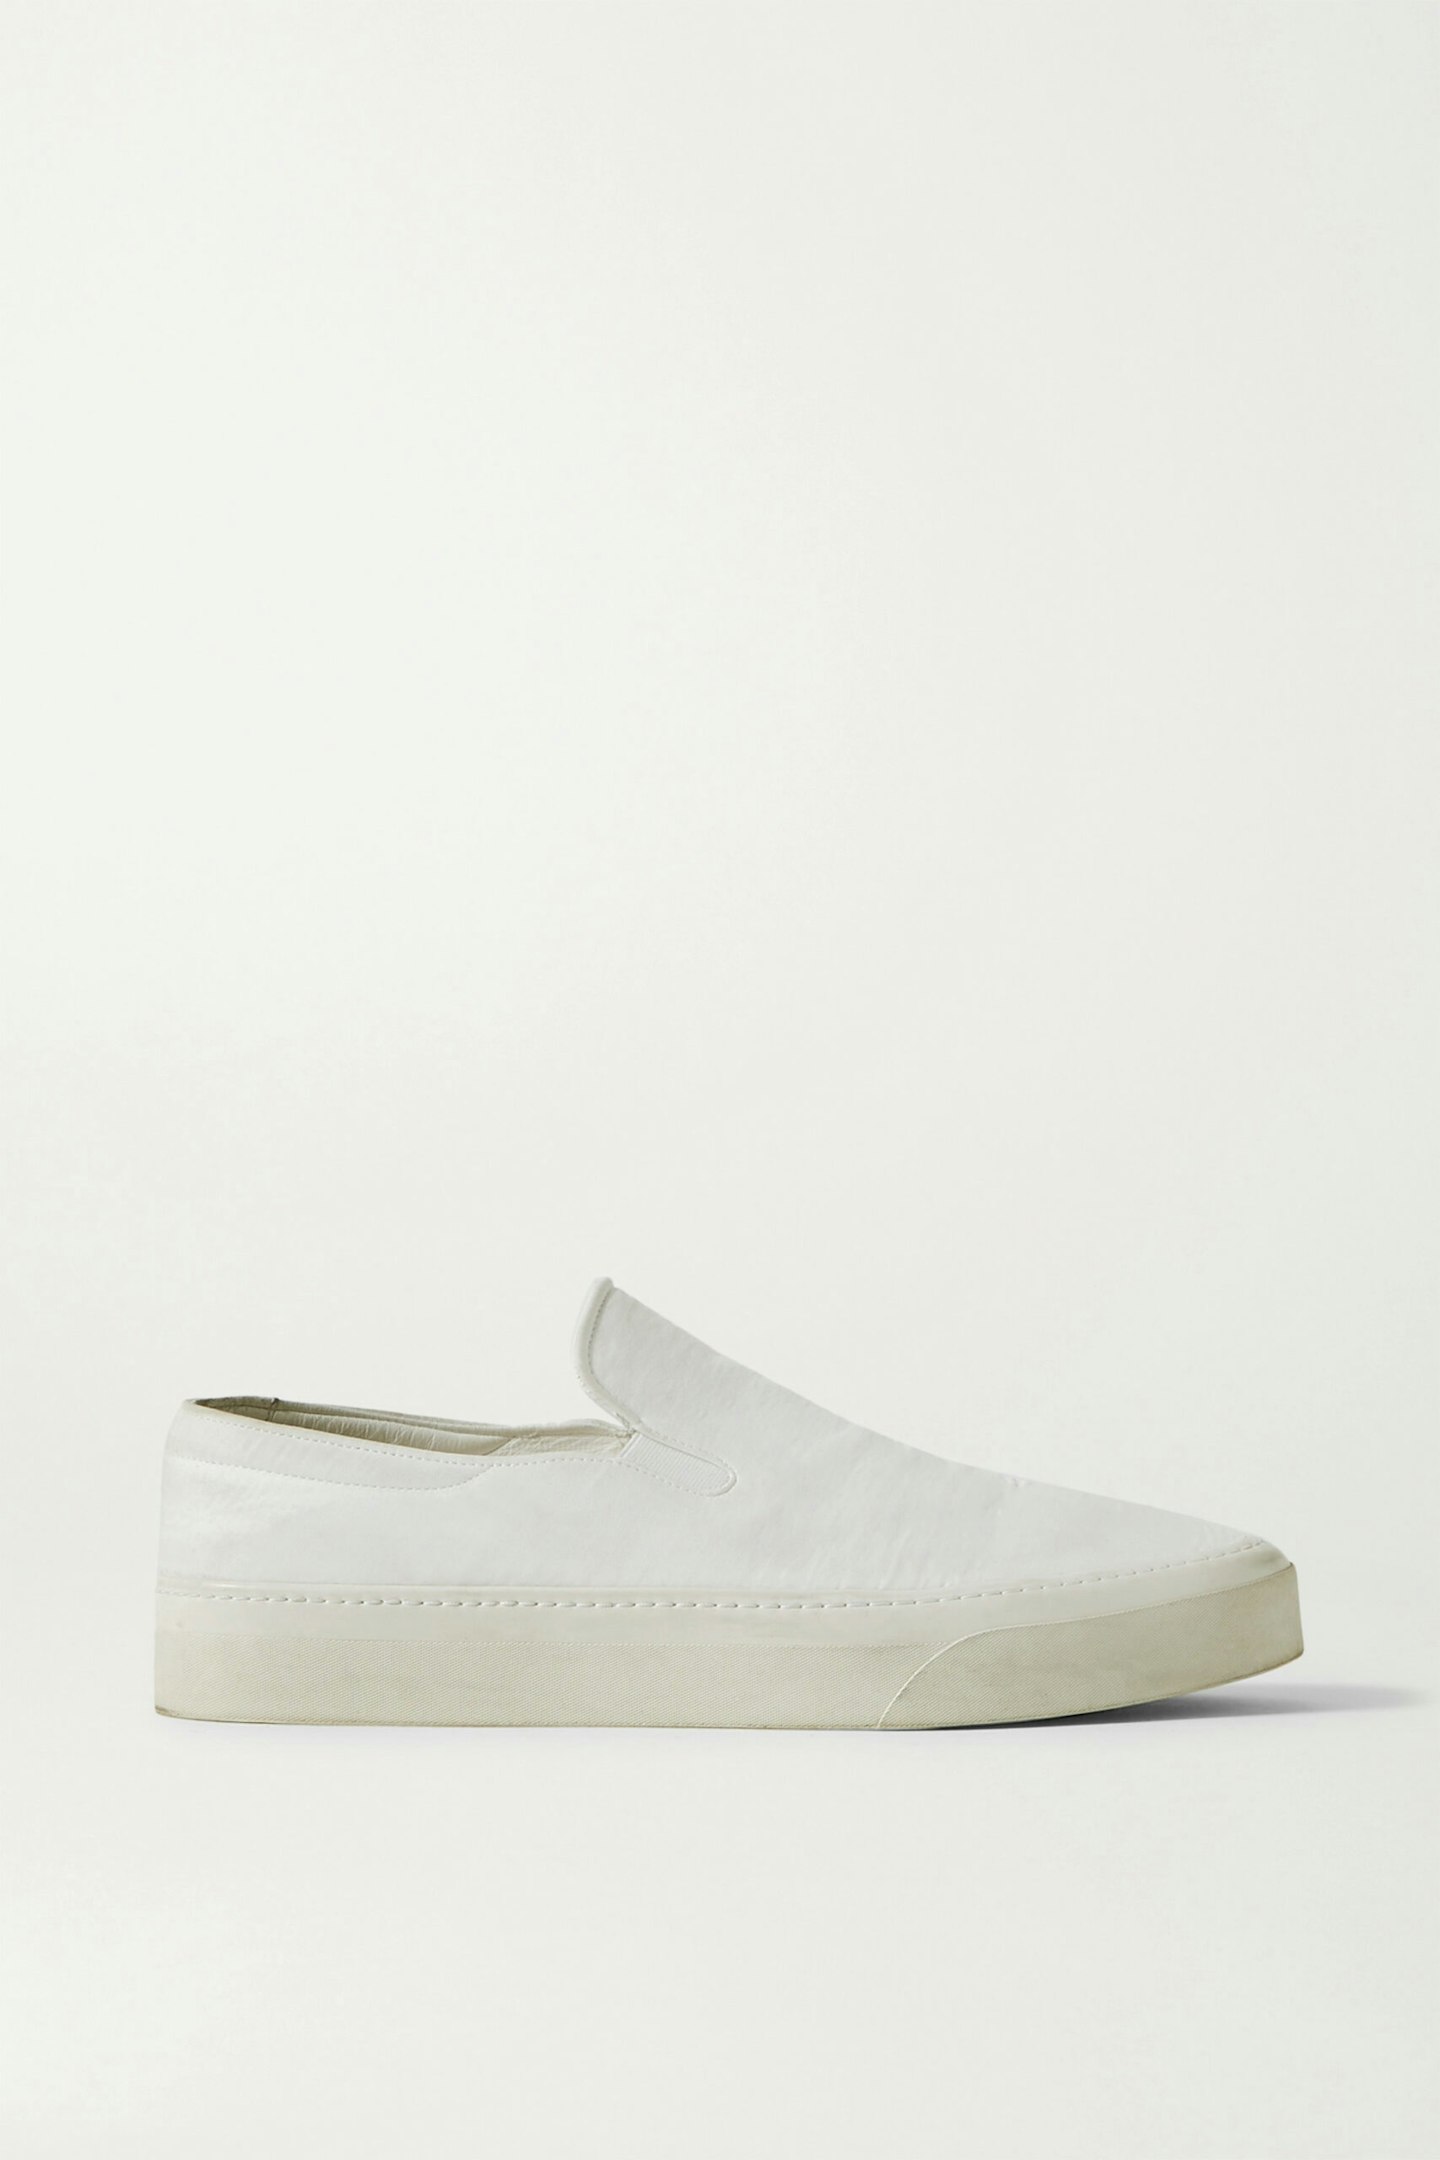 The Row, Marie H Canvas Slip-On Sneakers